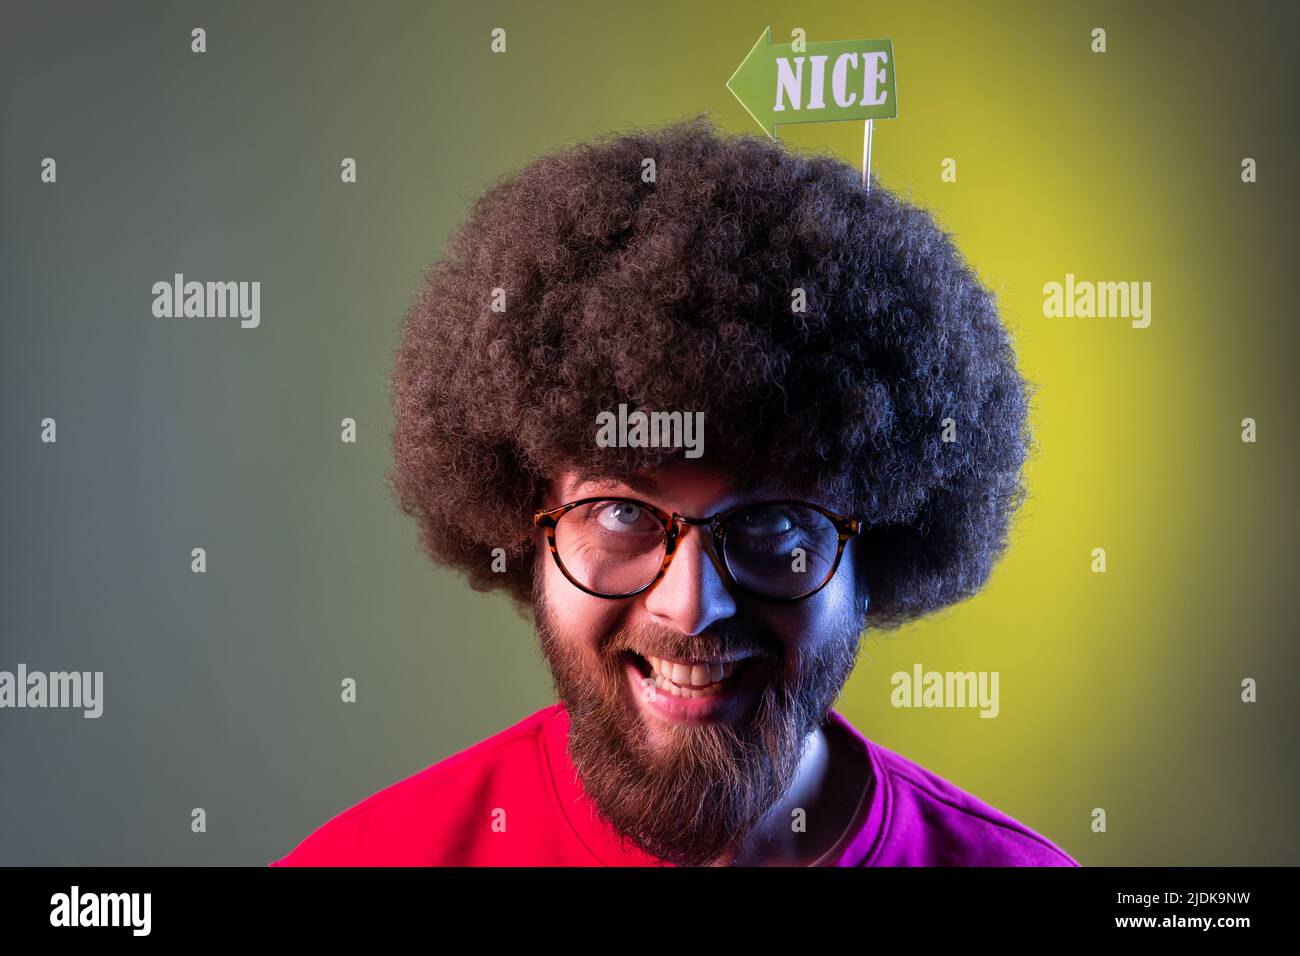 Portrait of crazy happy hipster man with Afro hairstyle celebrating holiday, having festive mood, looking up at party props in his hair. Indoor studio shot isolated on colorful neon light background. Stock Photo